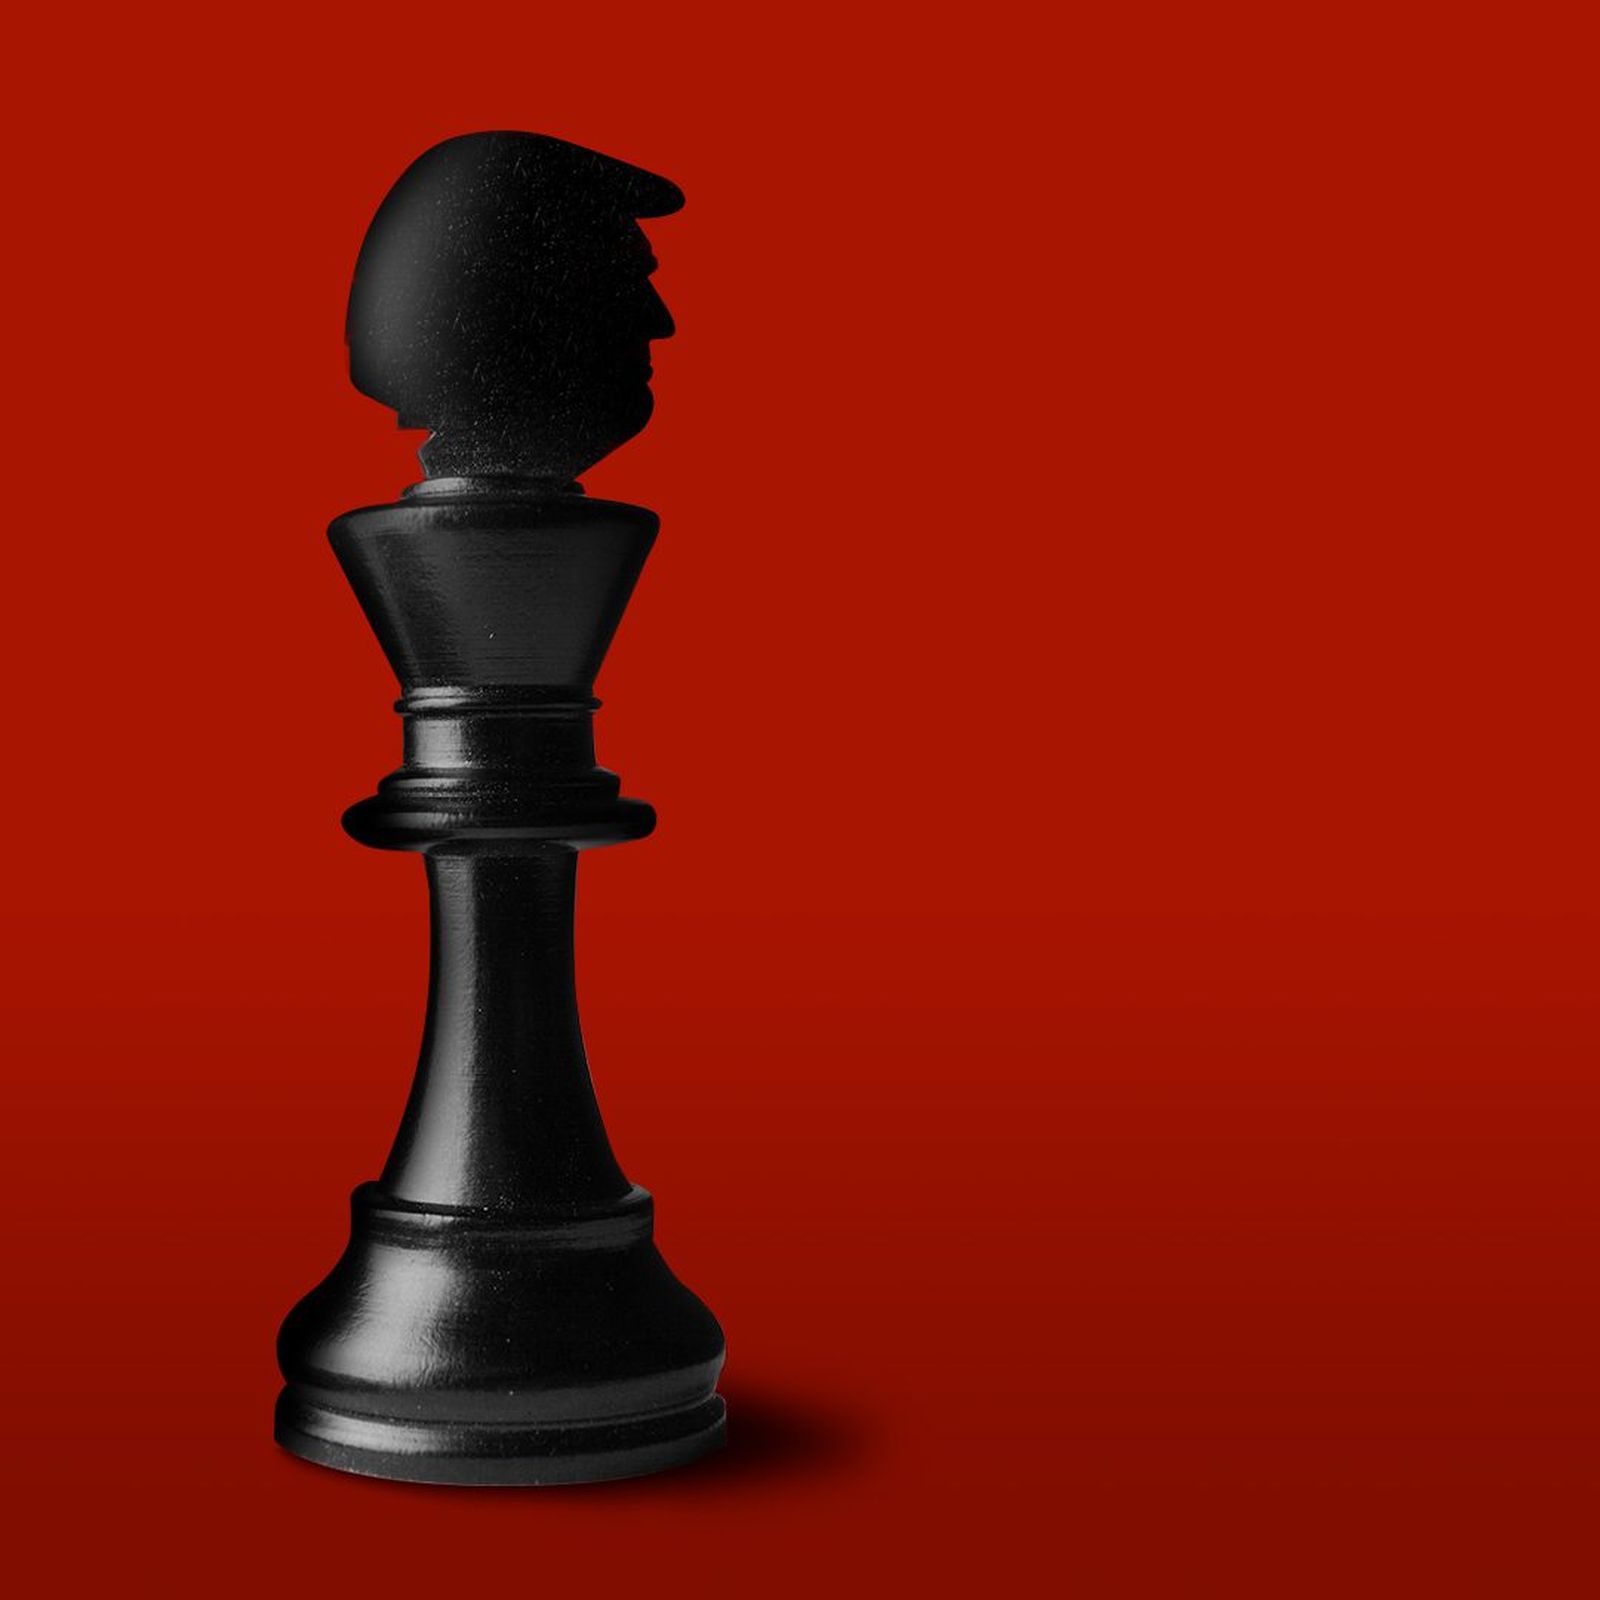 Image of a new chess piece called advisor